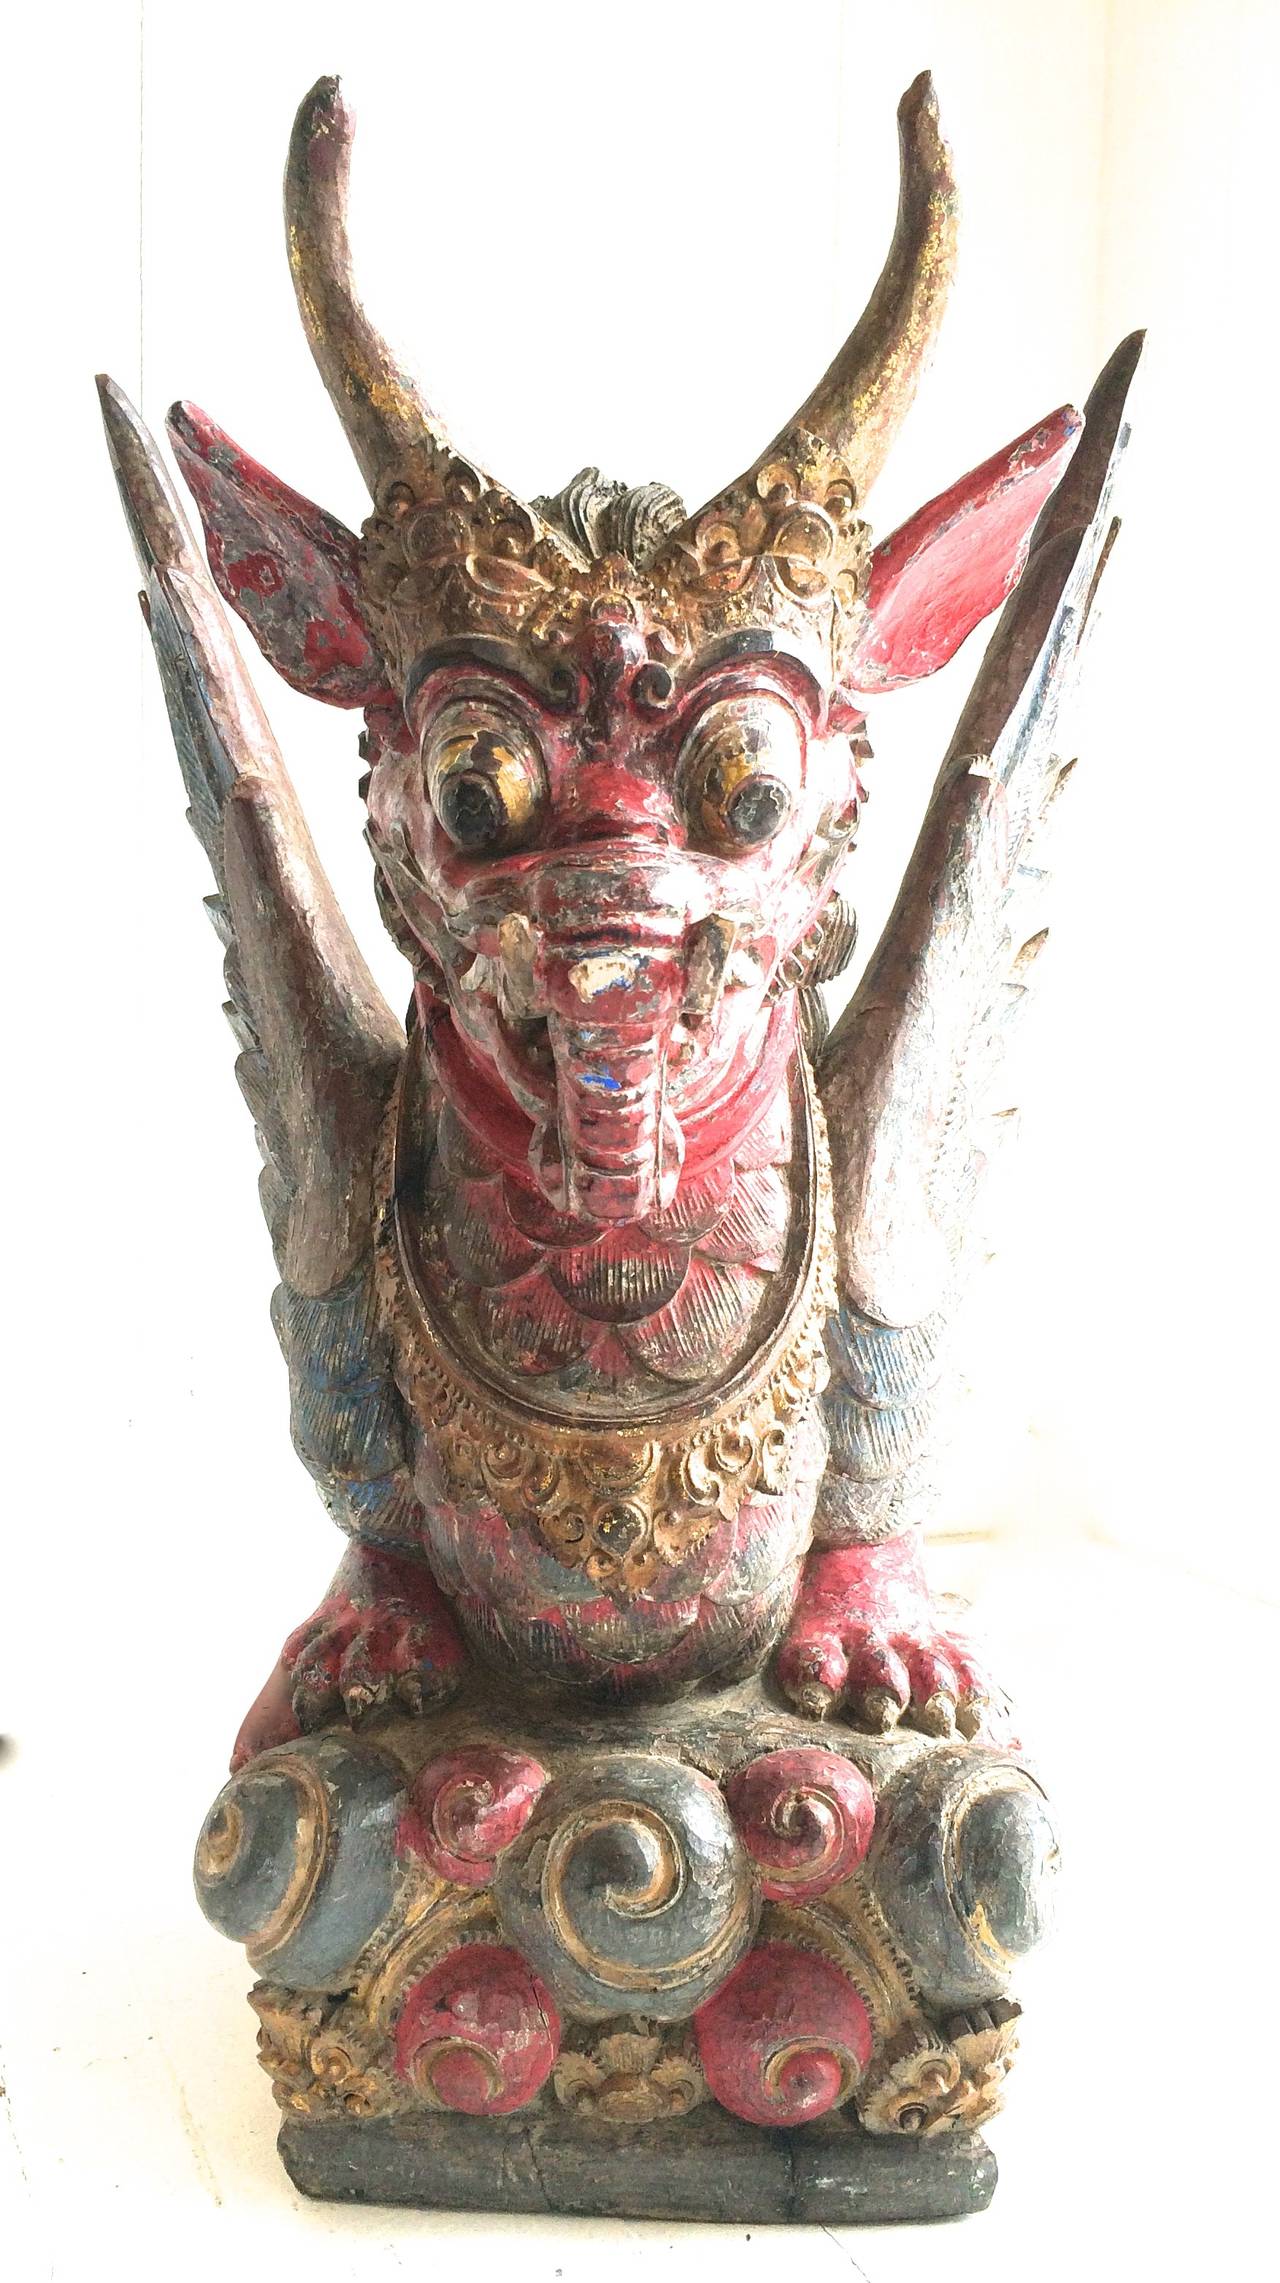 Winged Dragon Temple Offering Statue Bali - Sculpture by Unknown